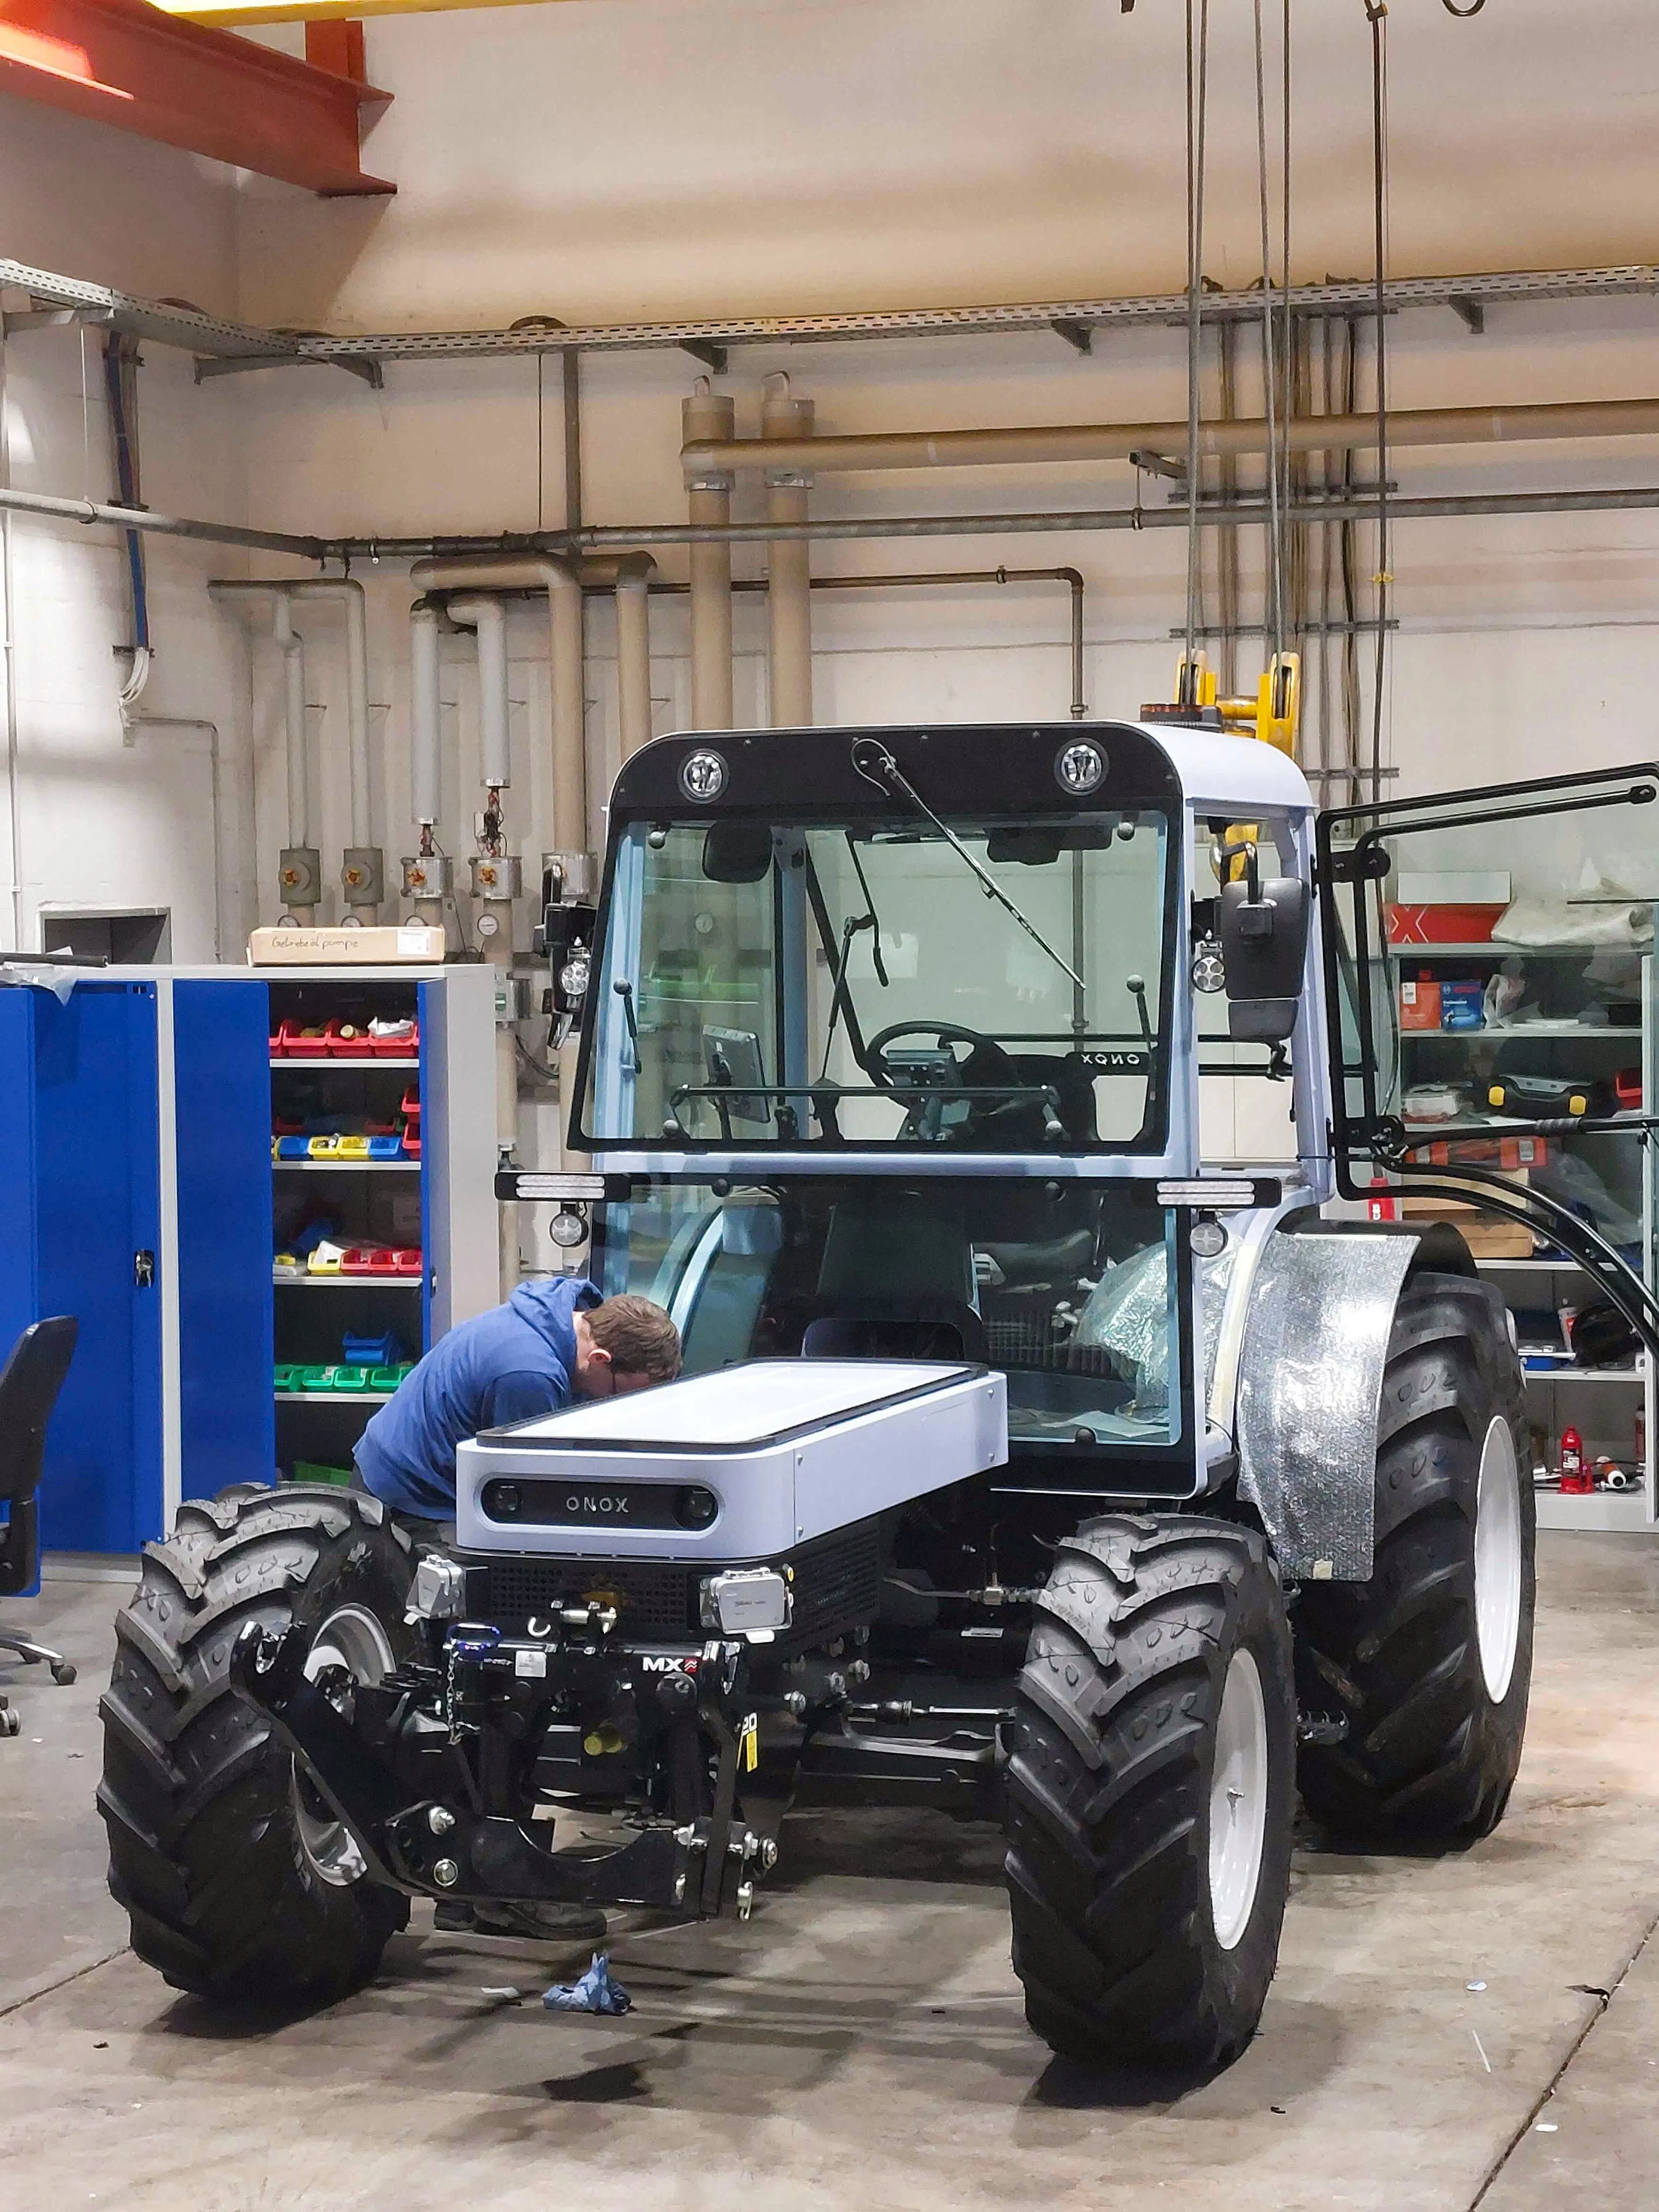 The Onox electric tractor during the assembly process